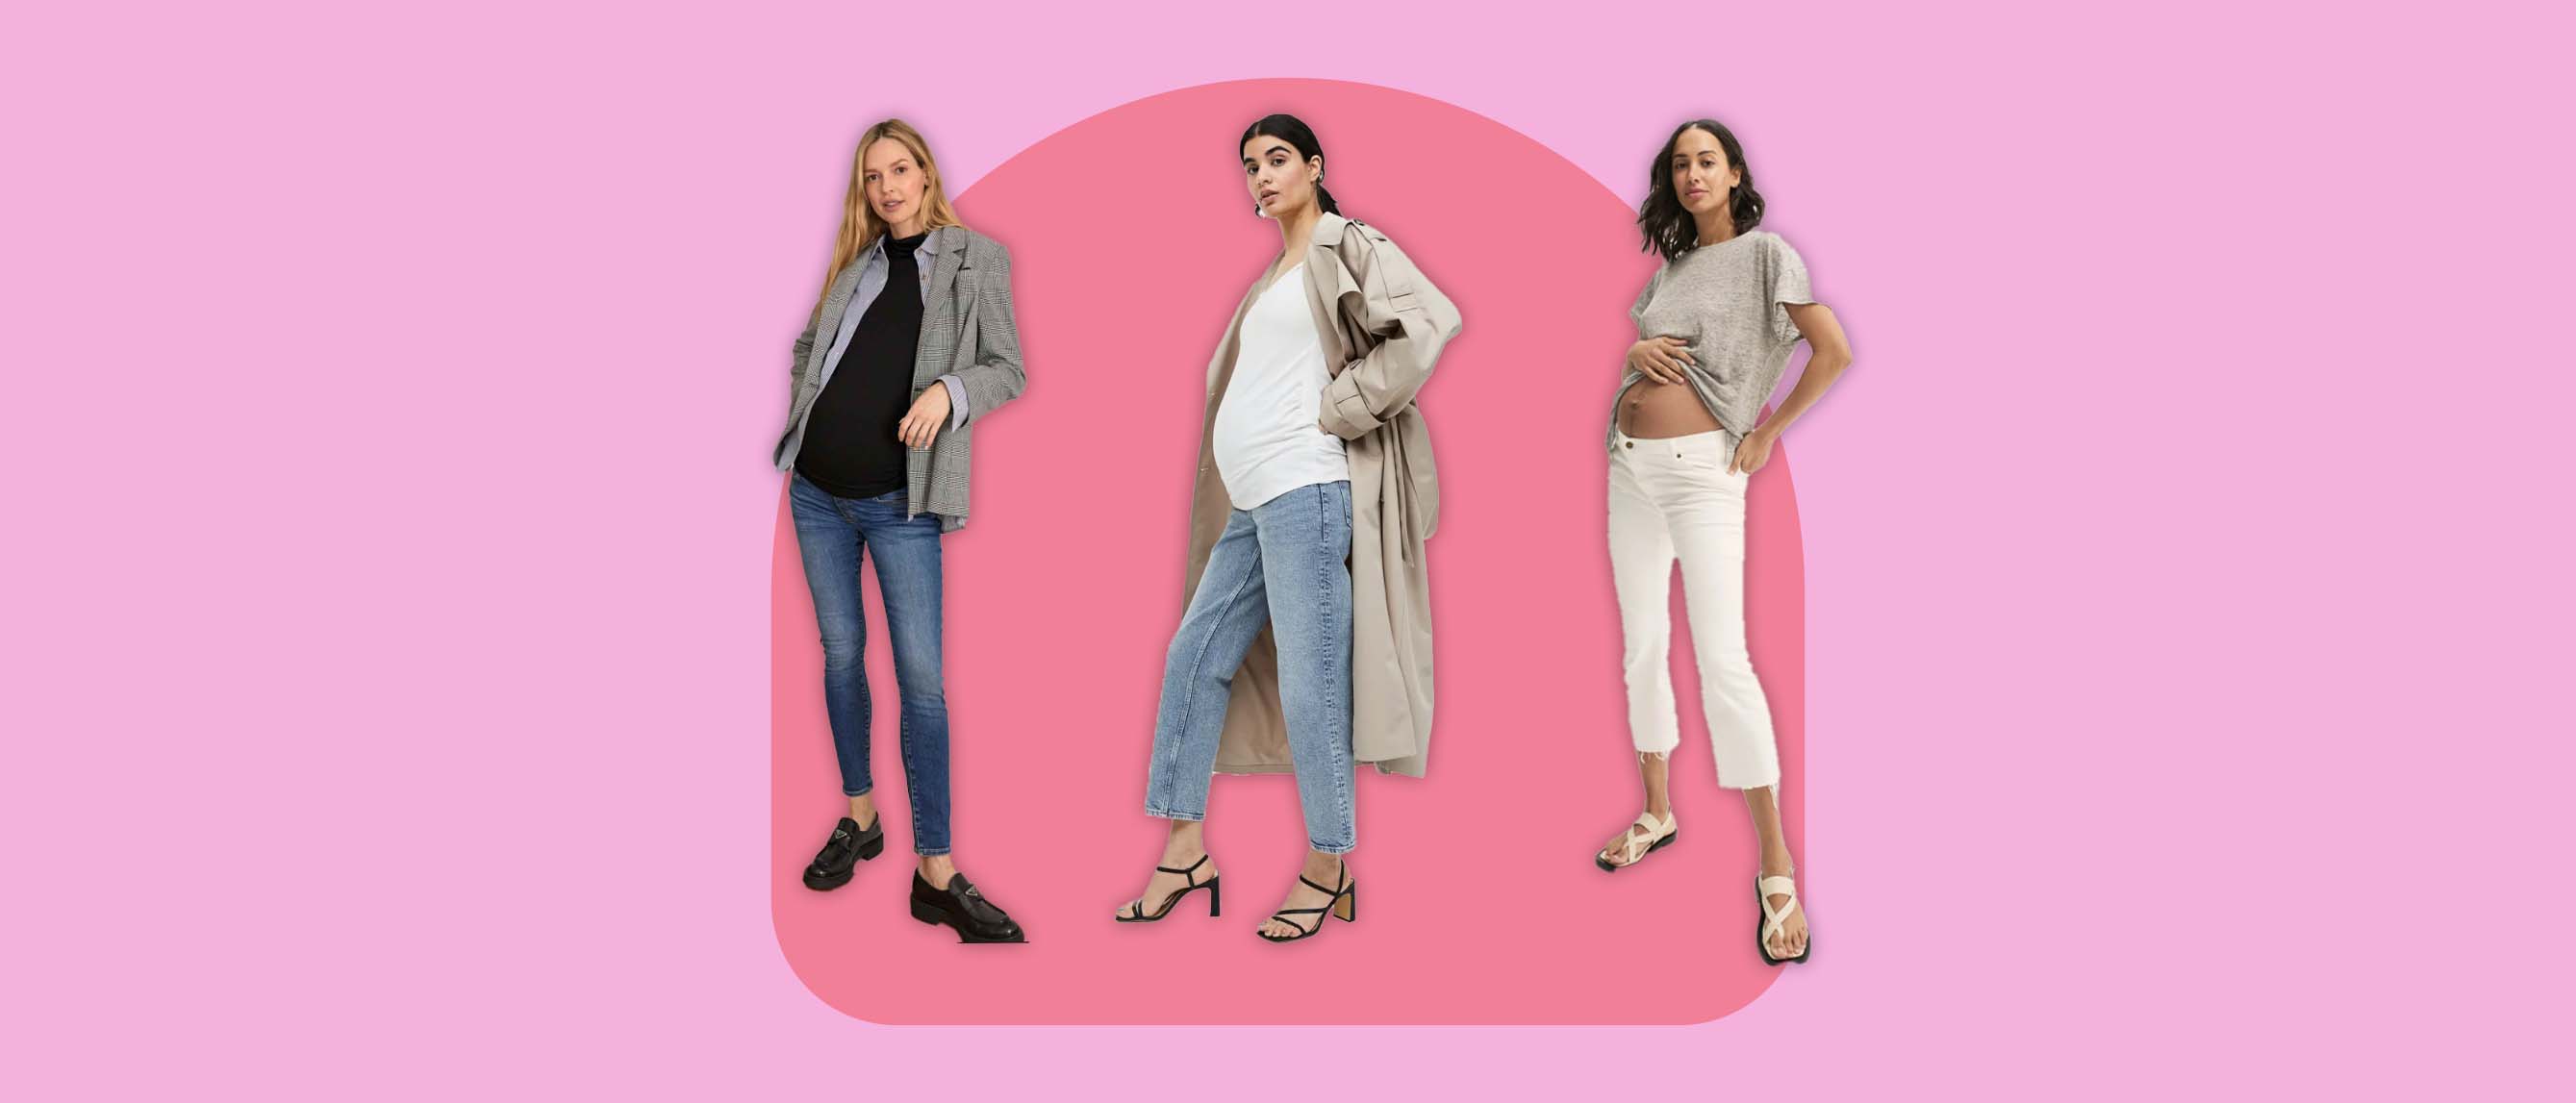 Three women modeling maternity jeans against a pink background